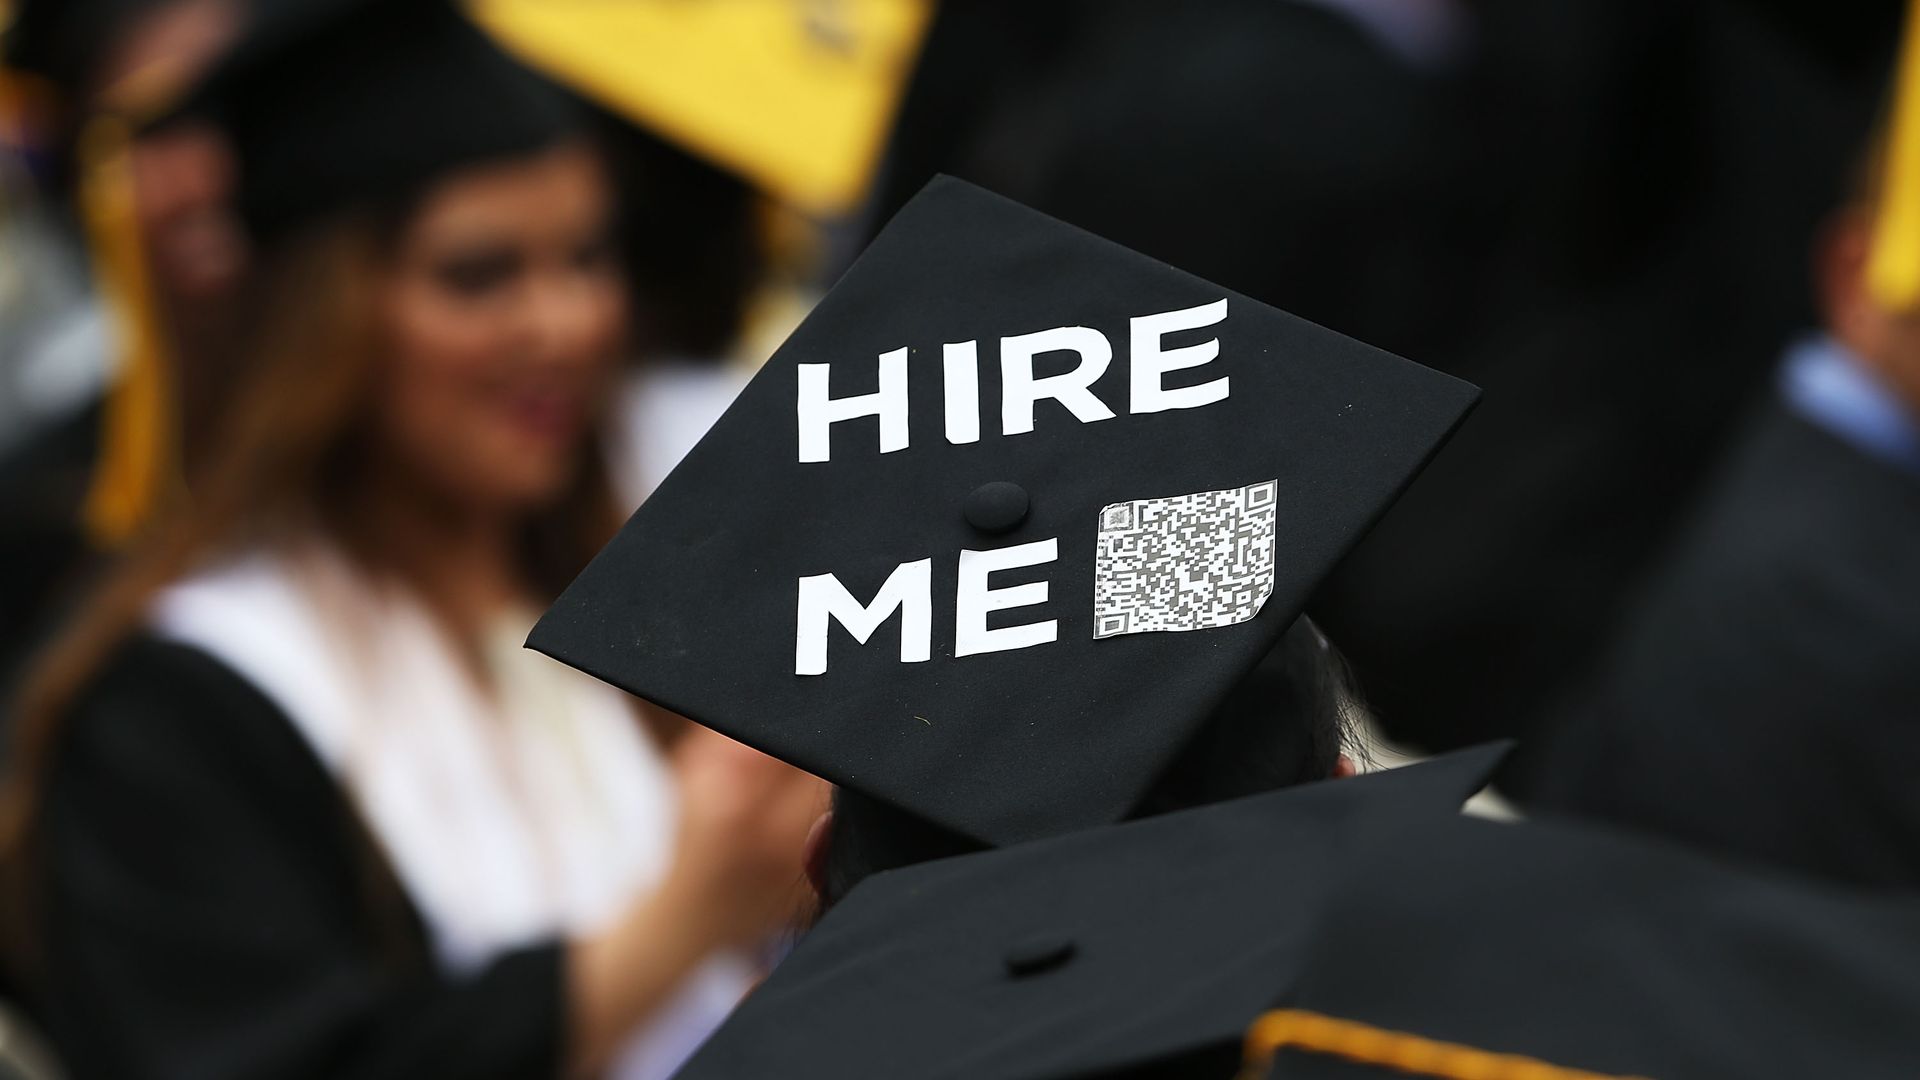 A graduation cap from a 2016 commencement ceremony, reading "Hire Me" with a QR code